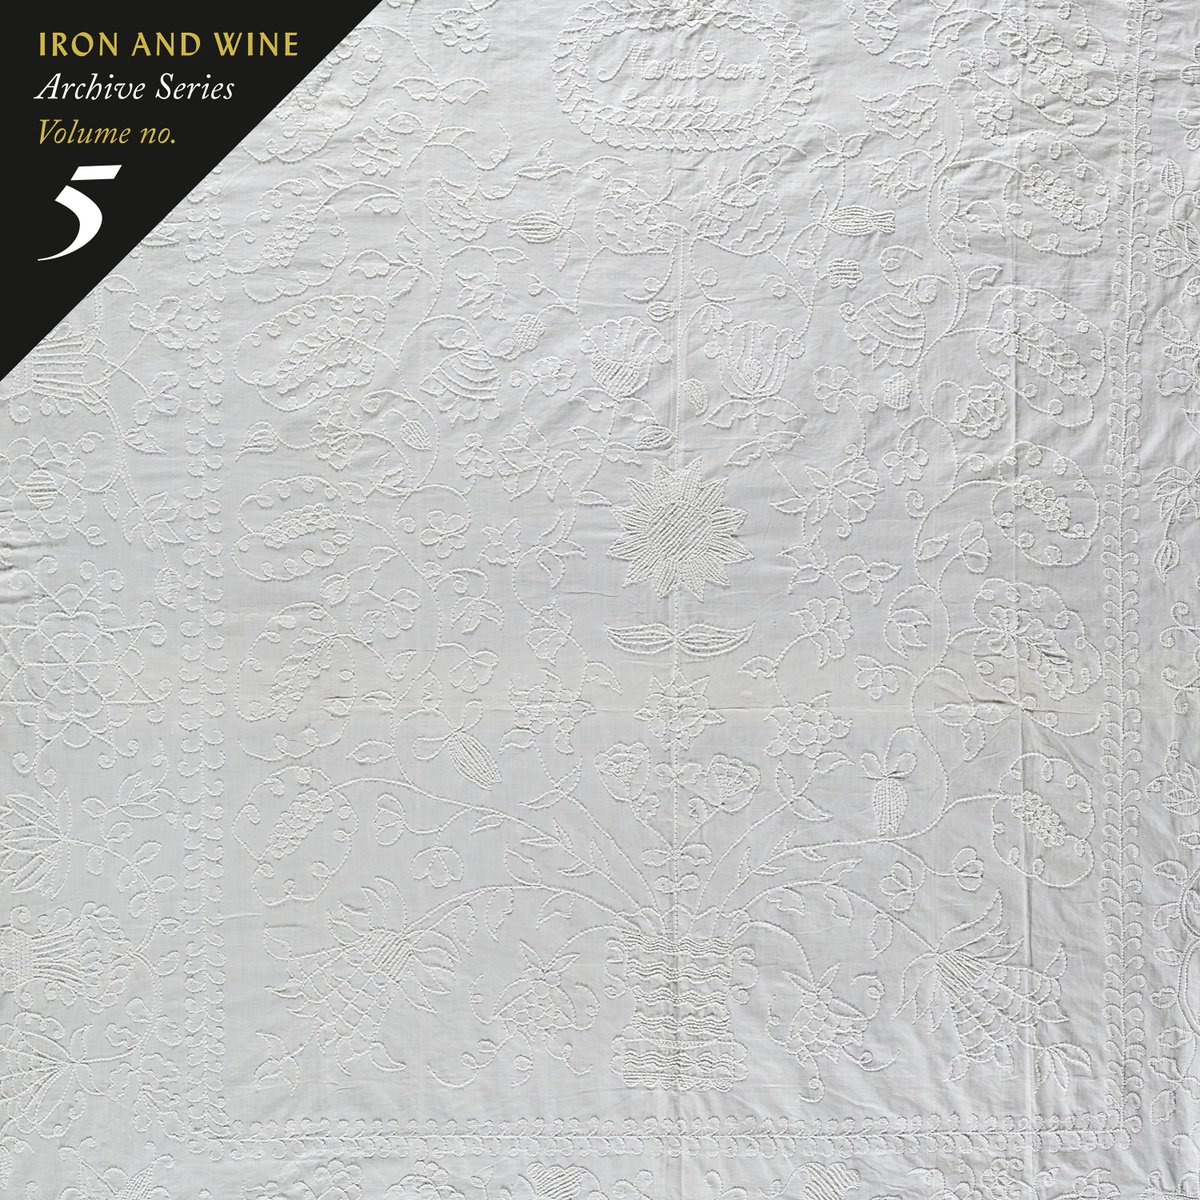 Iron & Wine's 'Archive Series Volume No. 5 : Tallahassee' was released today, back in 2021. The cover art for No. 5 features the 'Candlewick Spread' quilt, sewn by Maria Clark (1825–1840), American Folk Art Museum. Listen to 'Tallahassee' lnk.to/IWVol5 @subpop